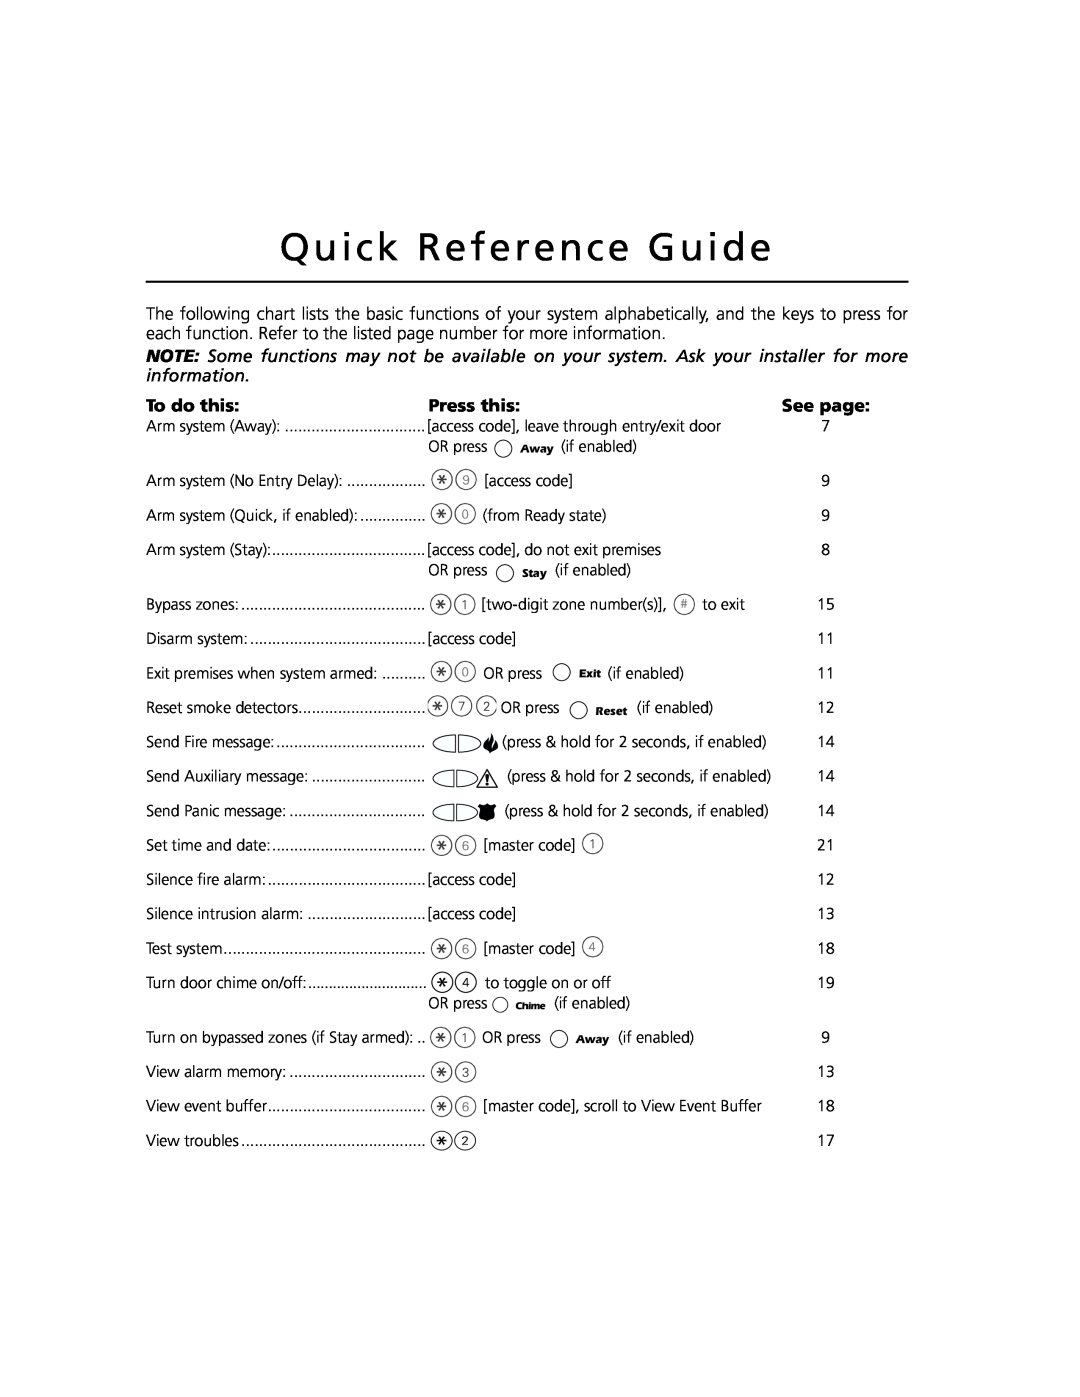 ADT Security Services Power 864 manual Quick Reference Guide, To do this, Press this, See page 